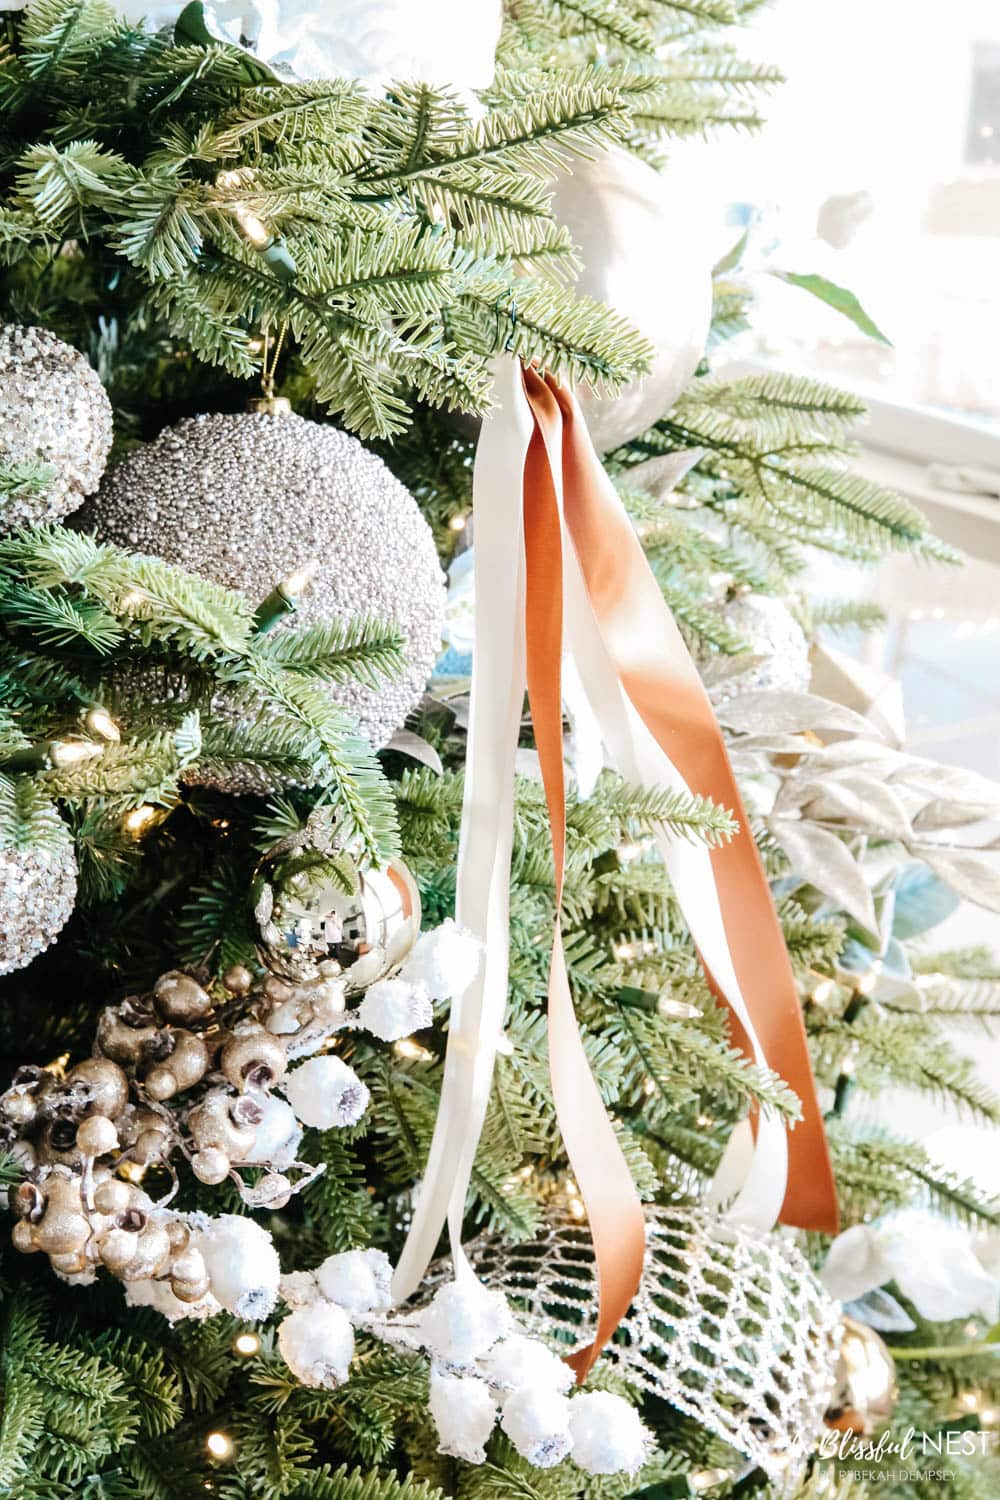 Bronze and white ribbons tied on a Christmas tree